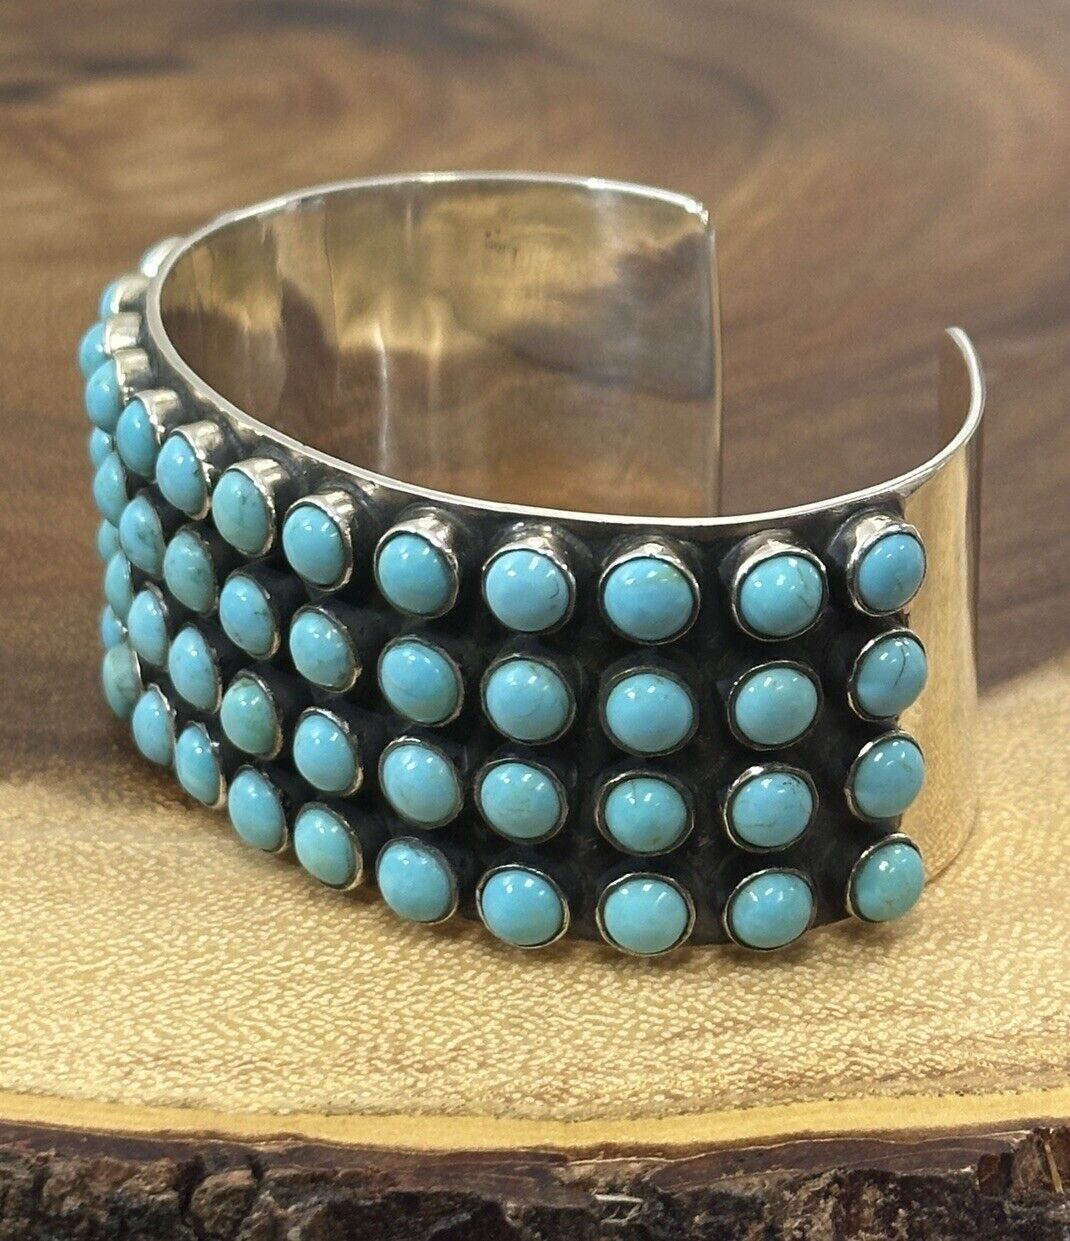 HUGE TURQUOISE CUFF 925 Sterling Silver 7 3/4 103 Grams!